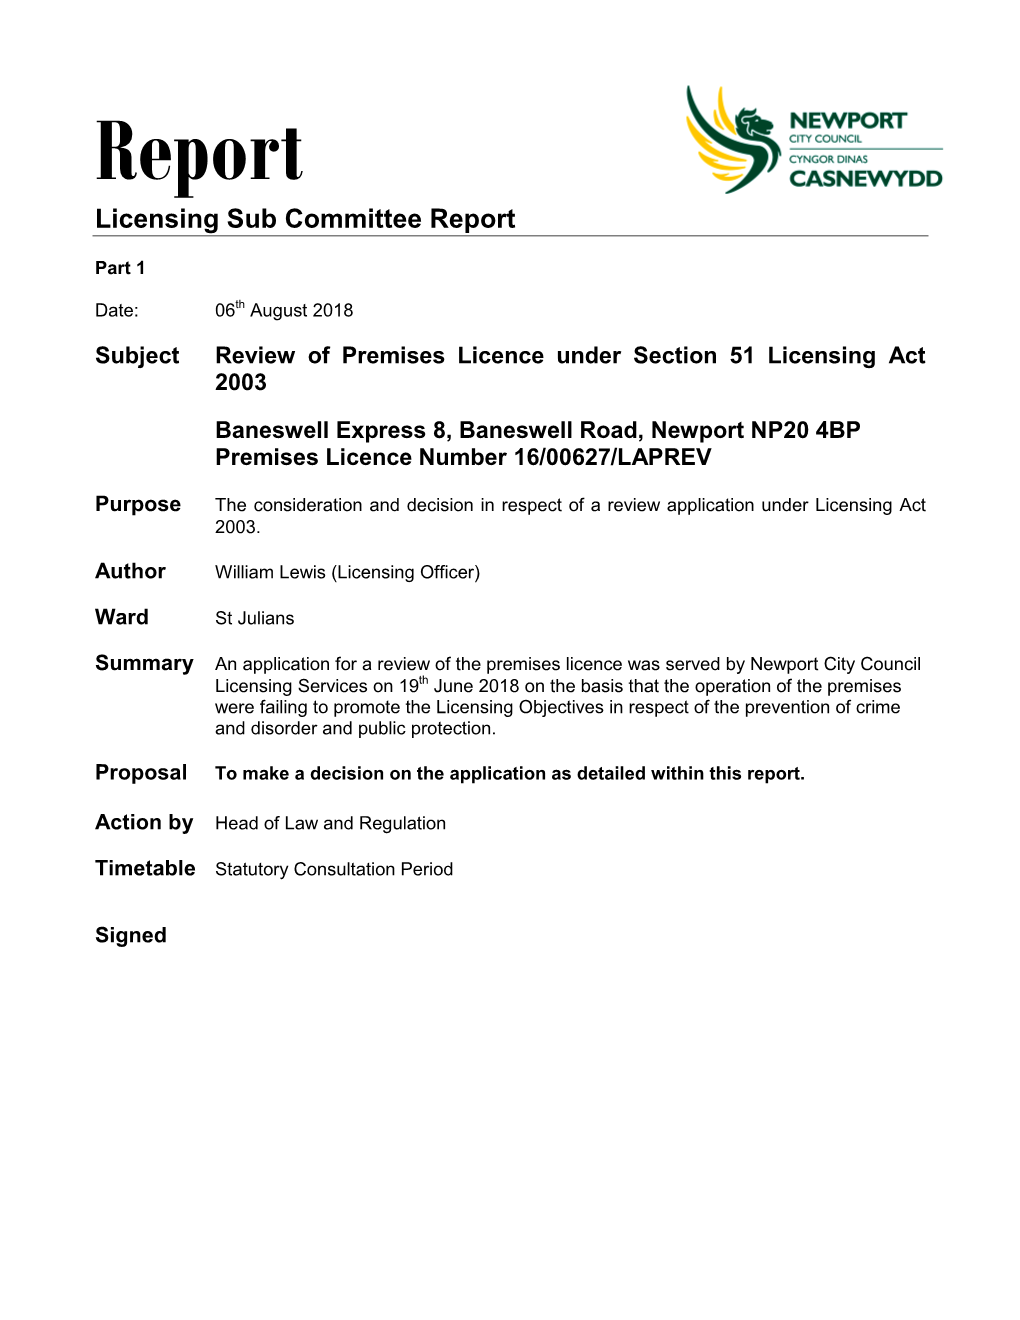 Review of the Premises Licence for Baneswell